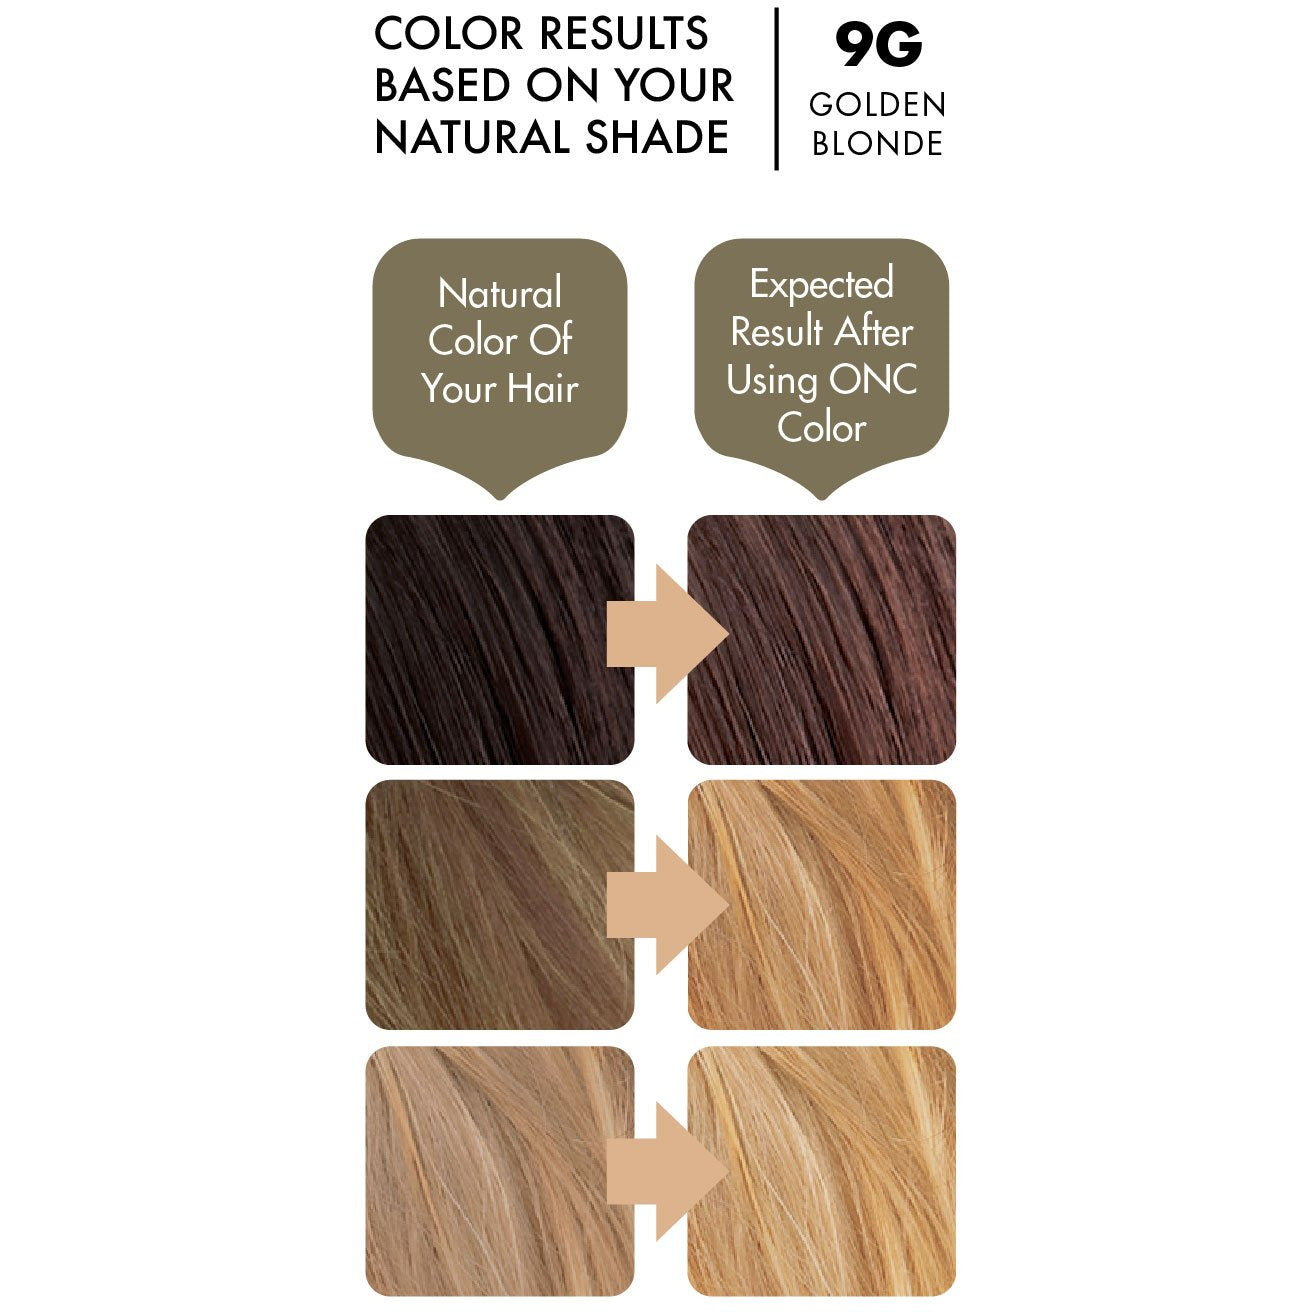 ONC 9G Golden Blonde Hair Dye With Organic Ingredients 120 mL / 4 fl. oz. Color Results